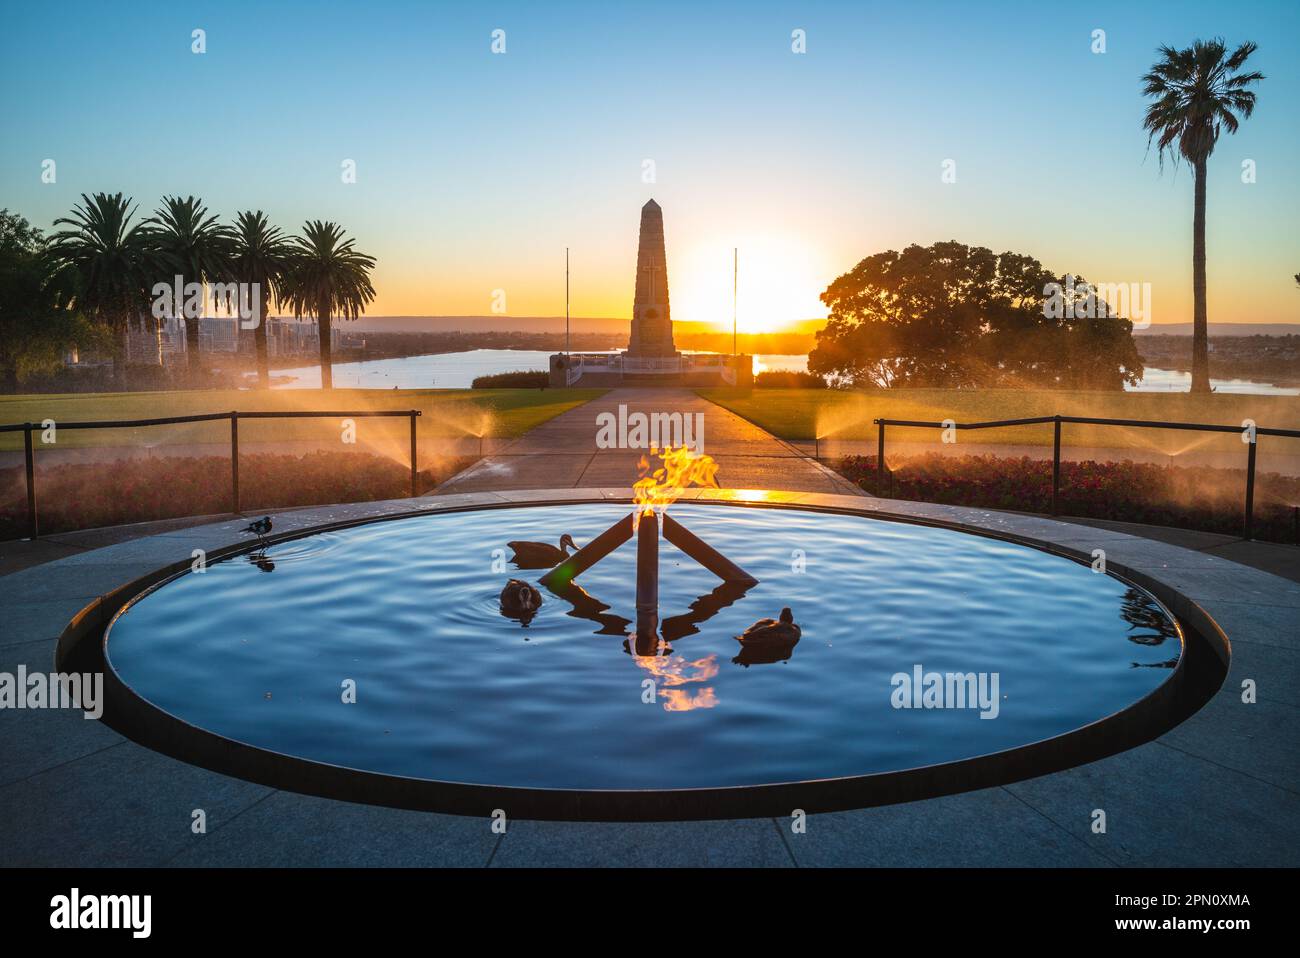 January 17, 2019: The State War Memorial Cenotaph at kings park in perth, australia, unveiled in the year of the Centenary of Western Australia, 24 No Stock Photo